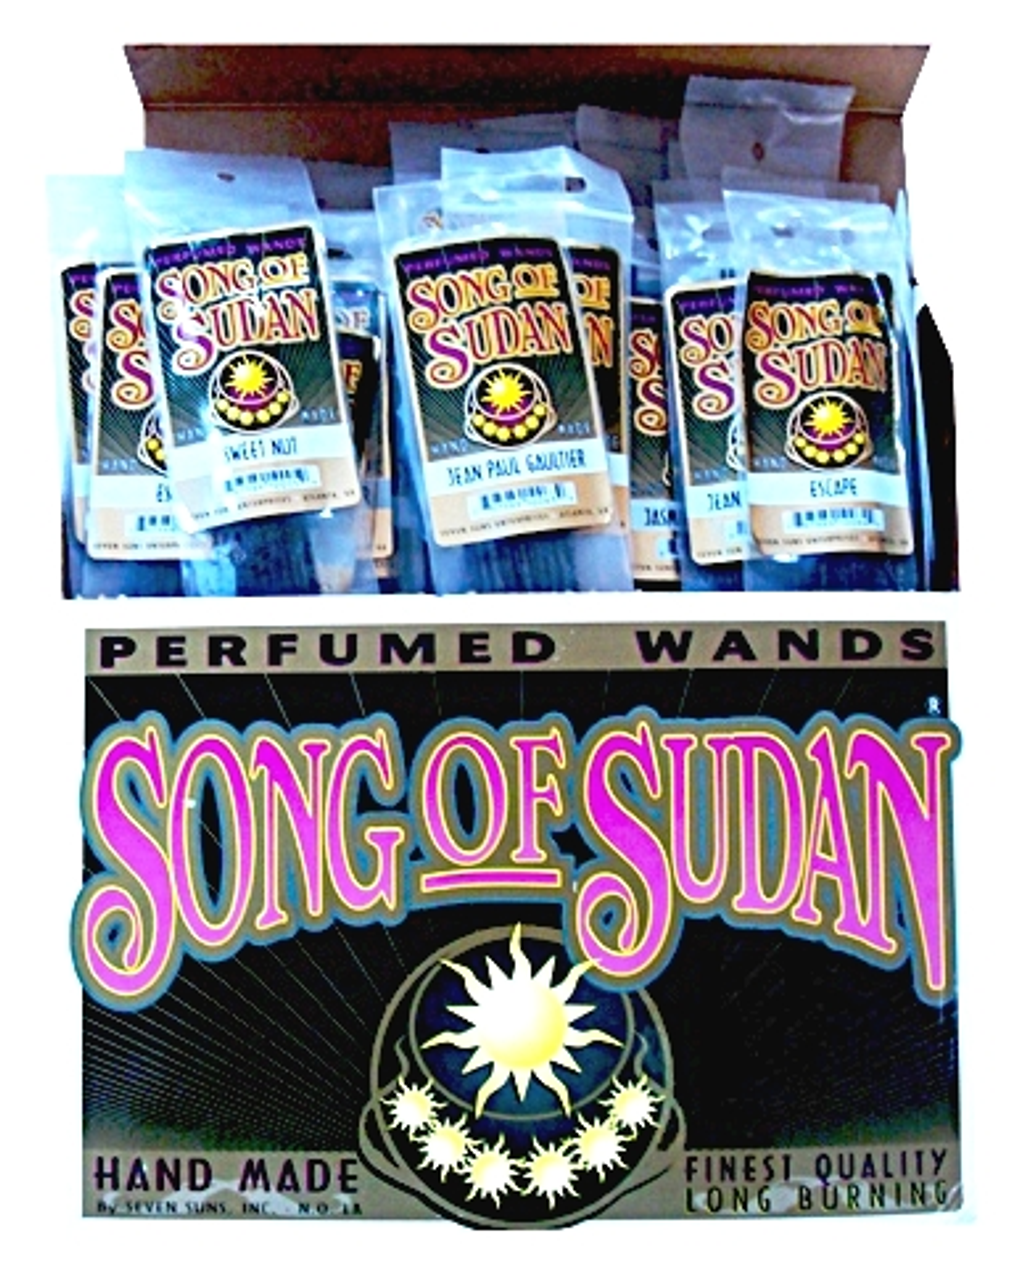 Song of Sudan 11" incense 72ct. Display - Sold By Nutel Distributors